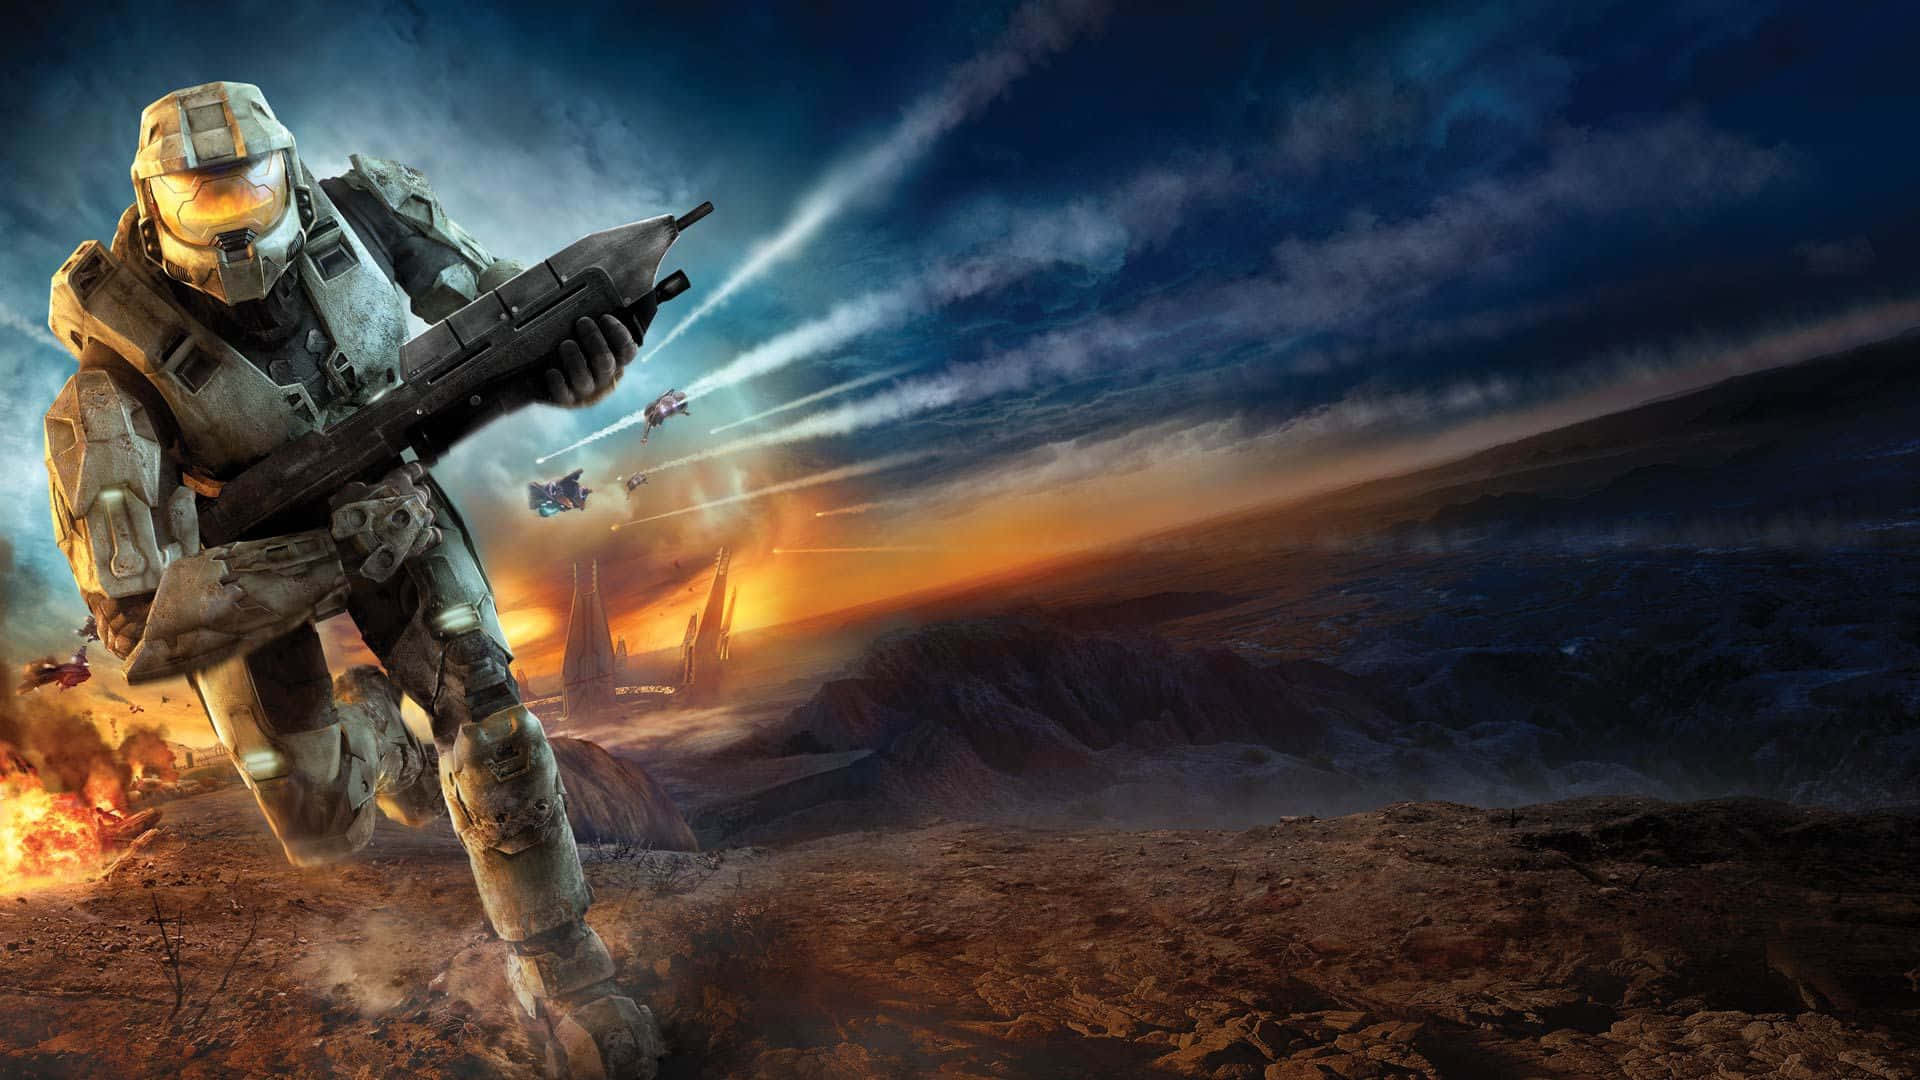 Cool Halo Soldier Running In Field Wallpaper